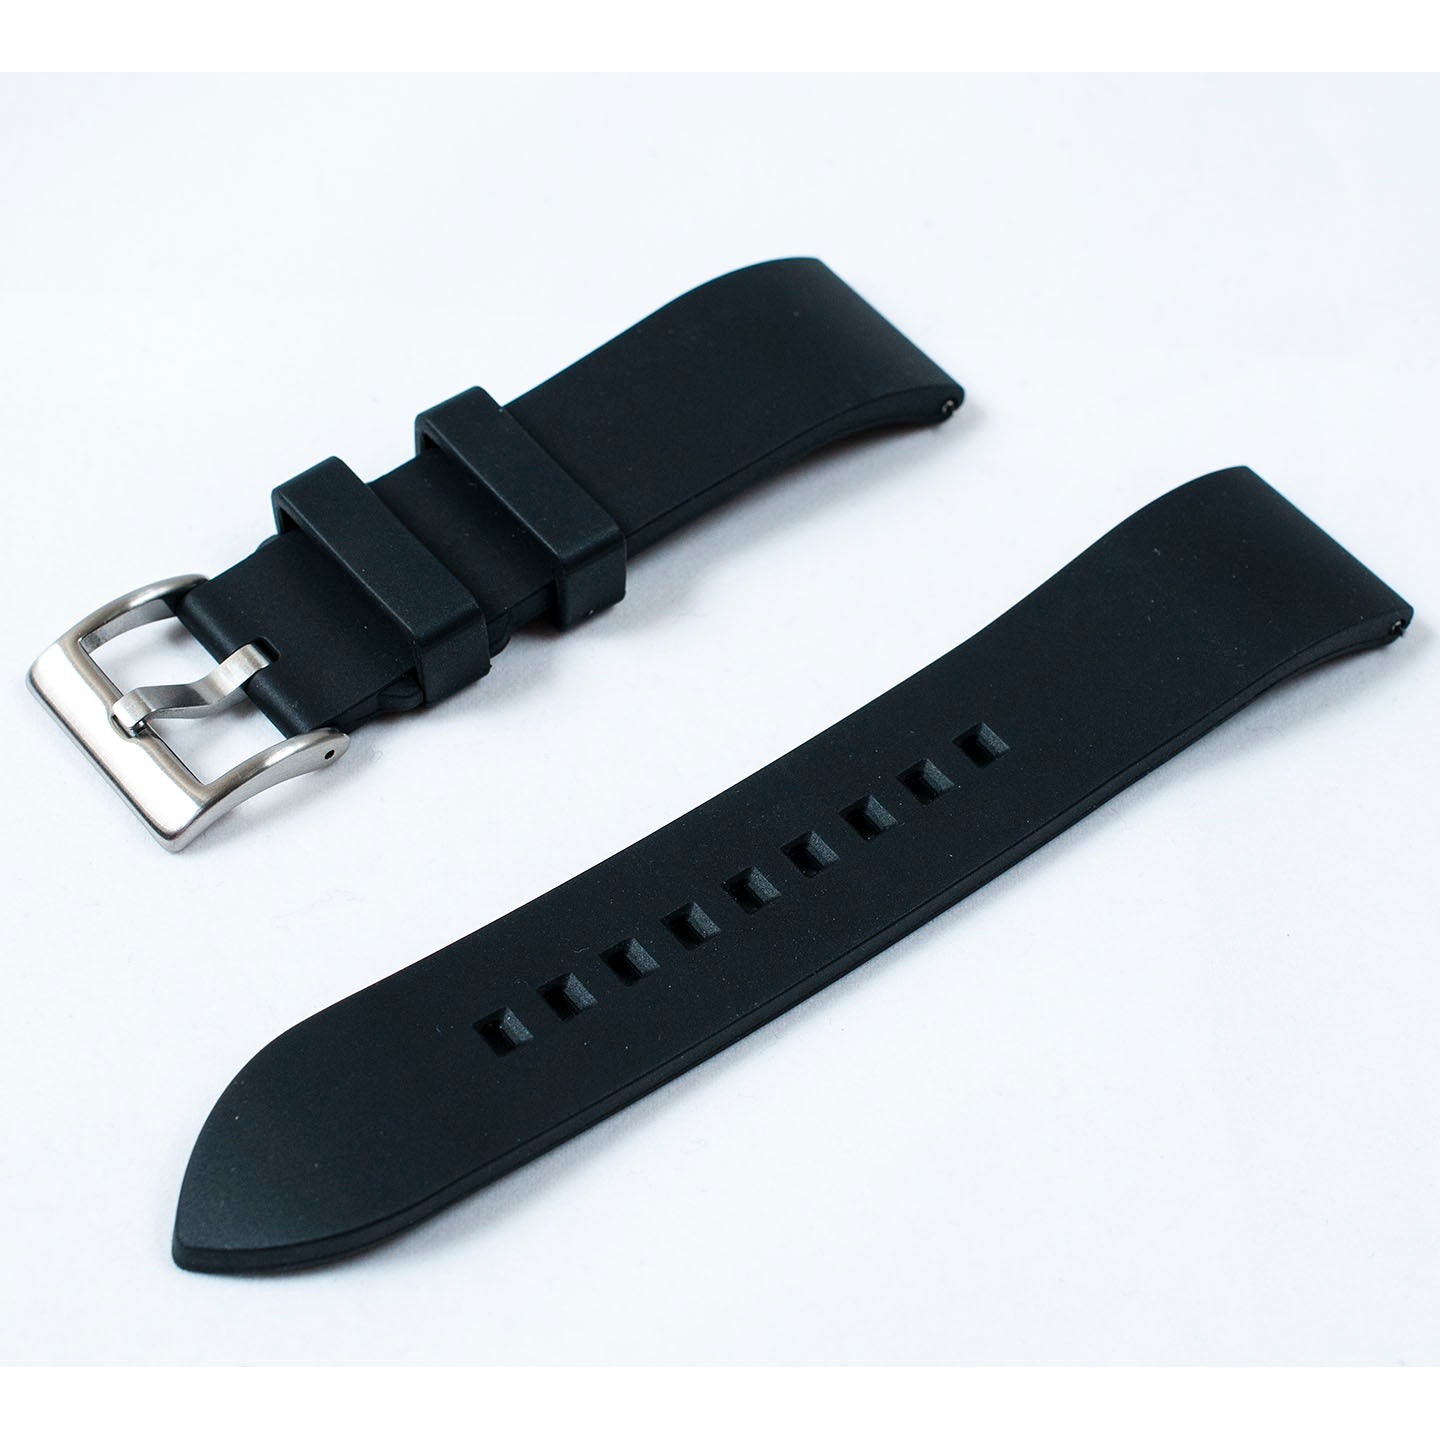 FKM Rubber Quick Release Replacement Watch Straps Bands 19mm 20,mm 21mm 22mm 24mm black